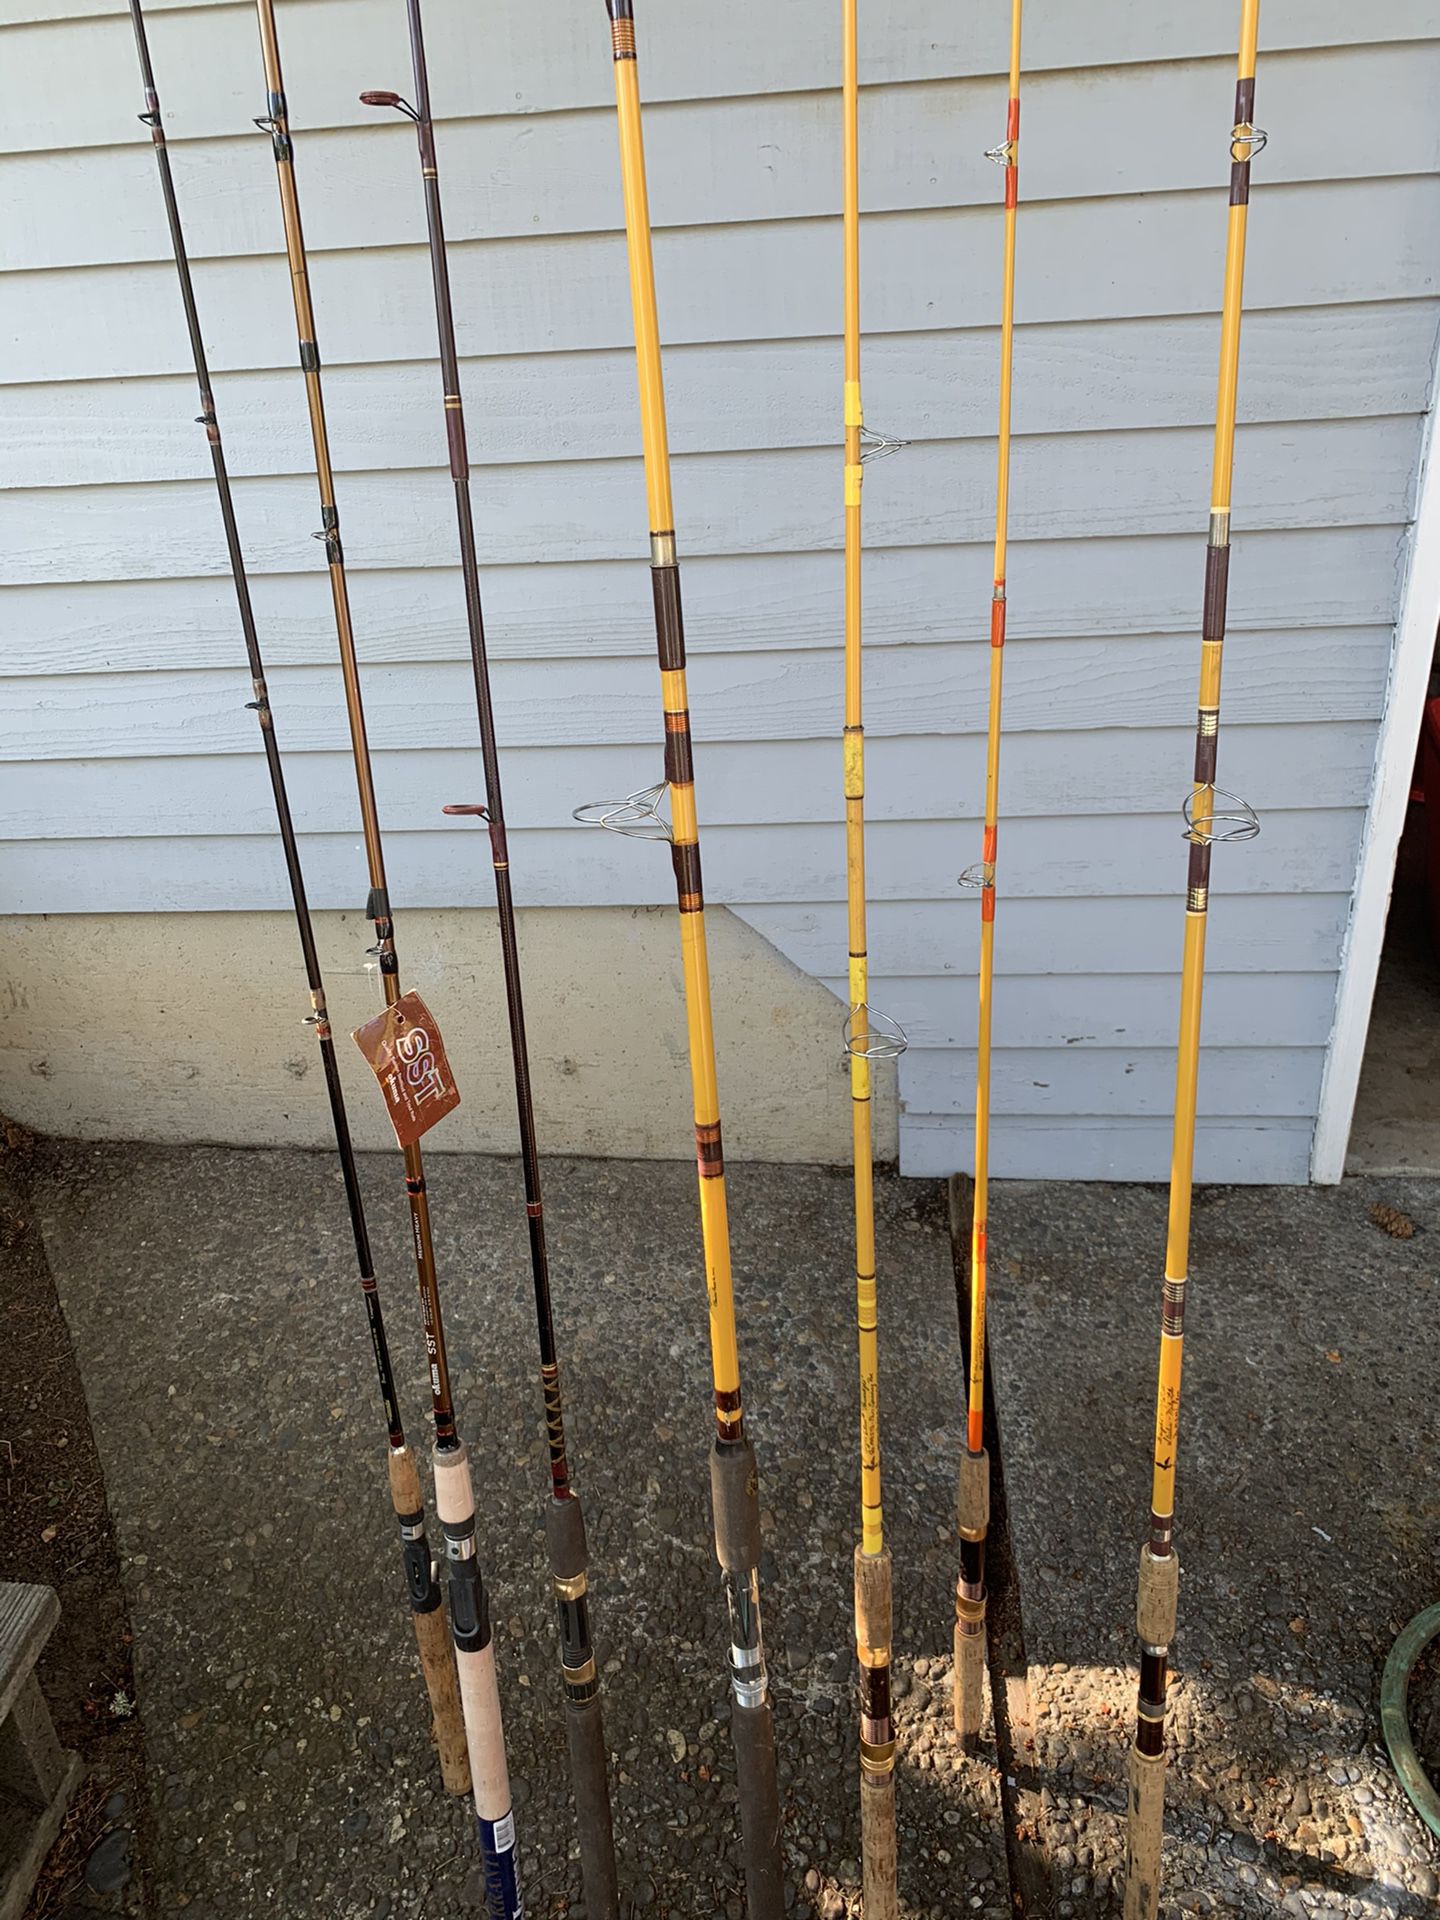 Fishing Pole and reel, Salt and freshwater gear